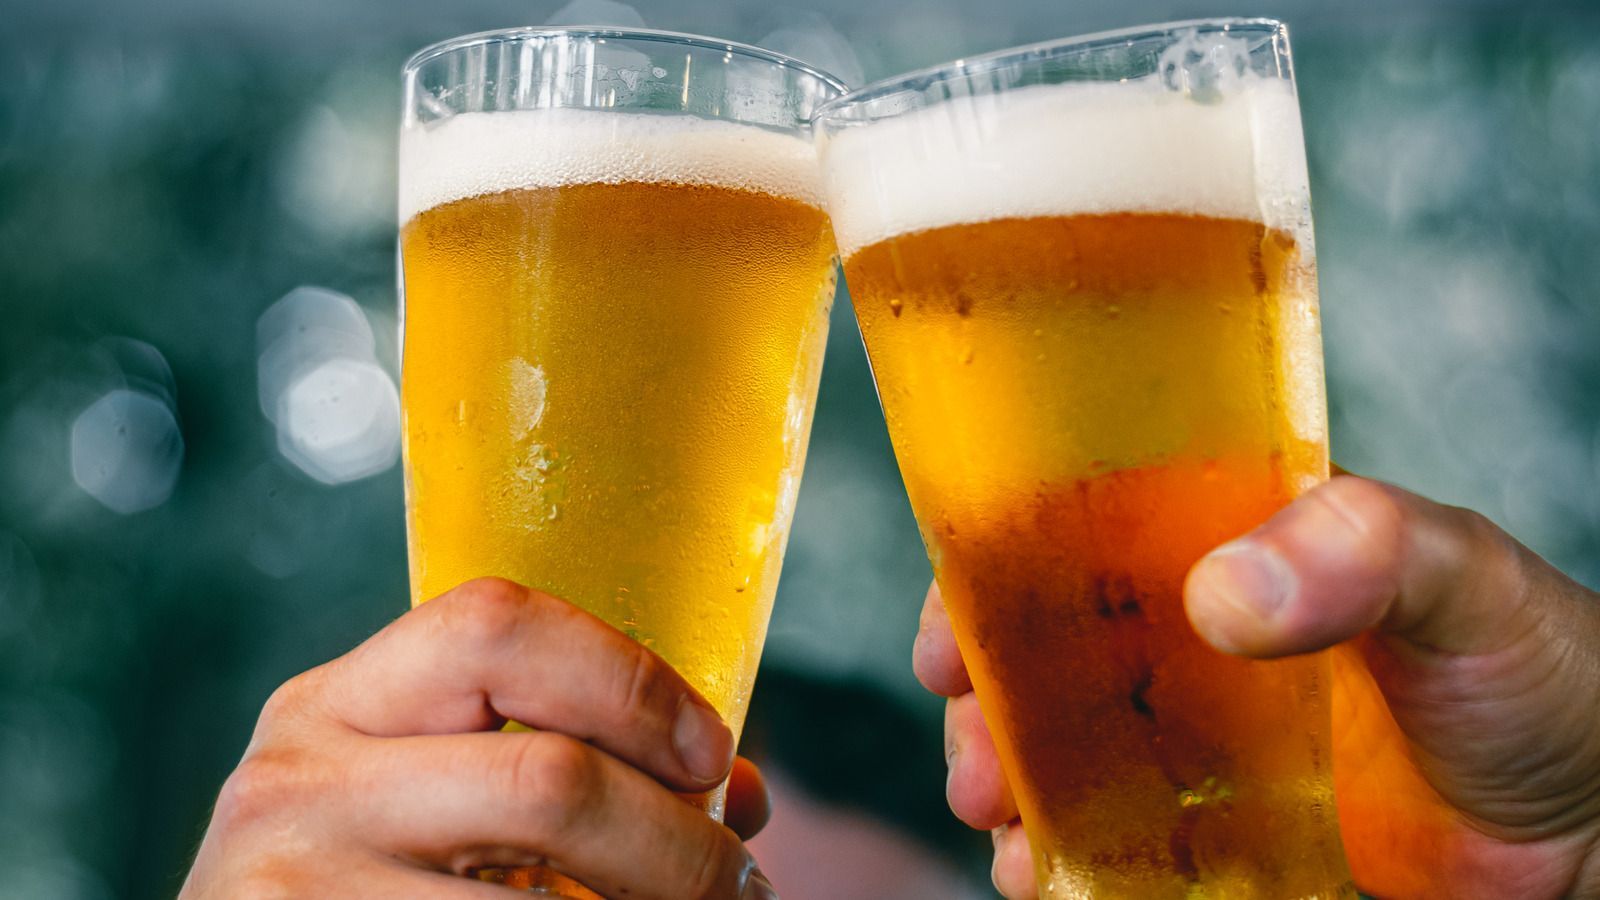 A picture of two glasses of beer